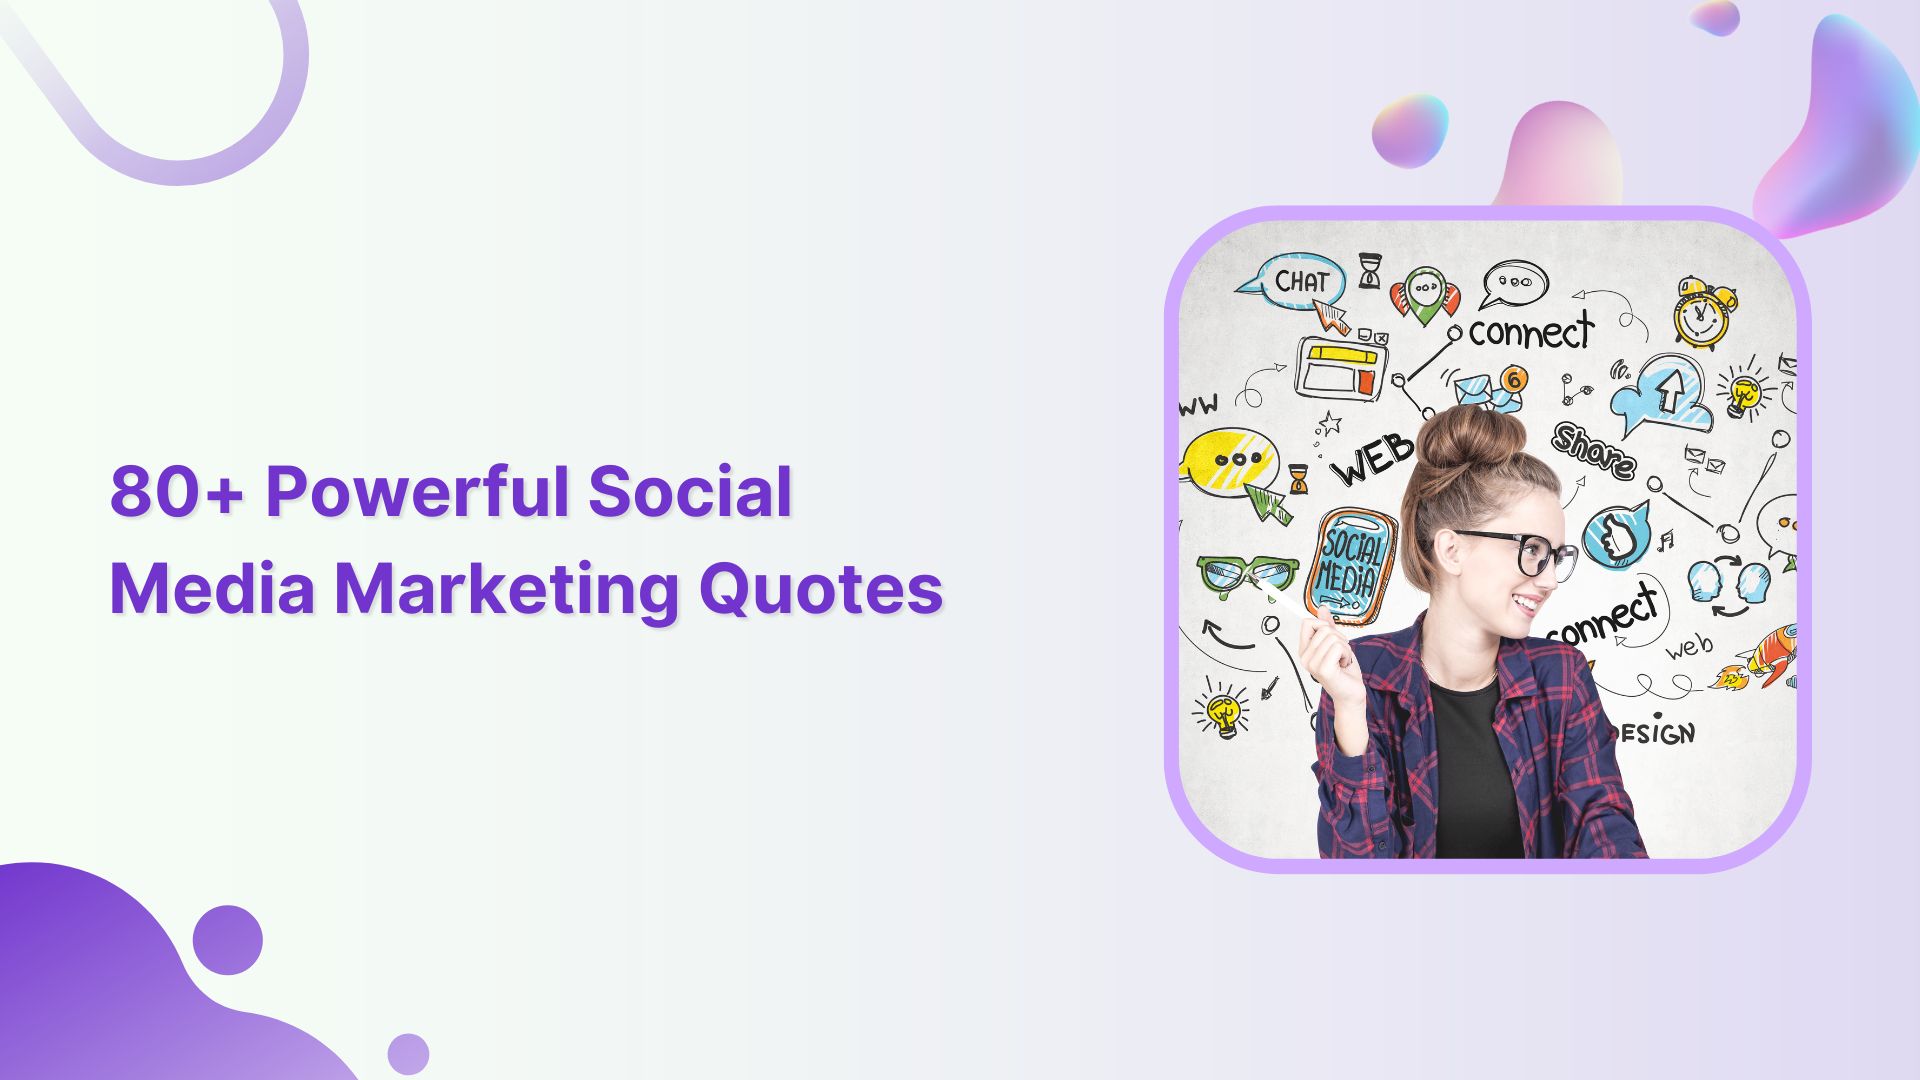 80+ Powerful Social Media Marketing Quotes to Inspire You